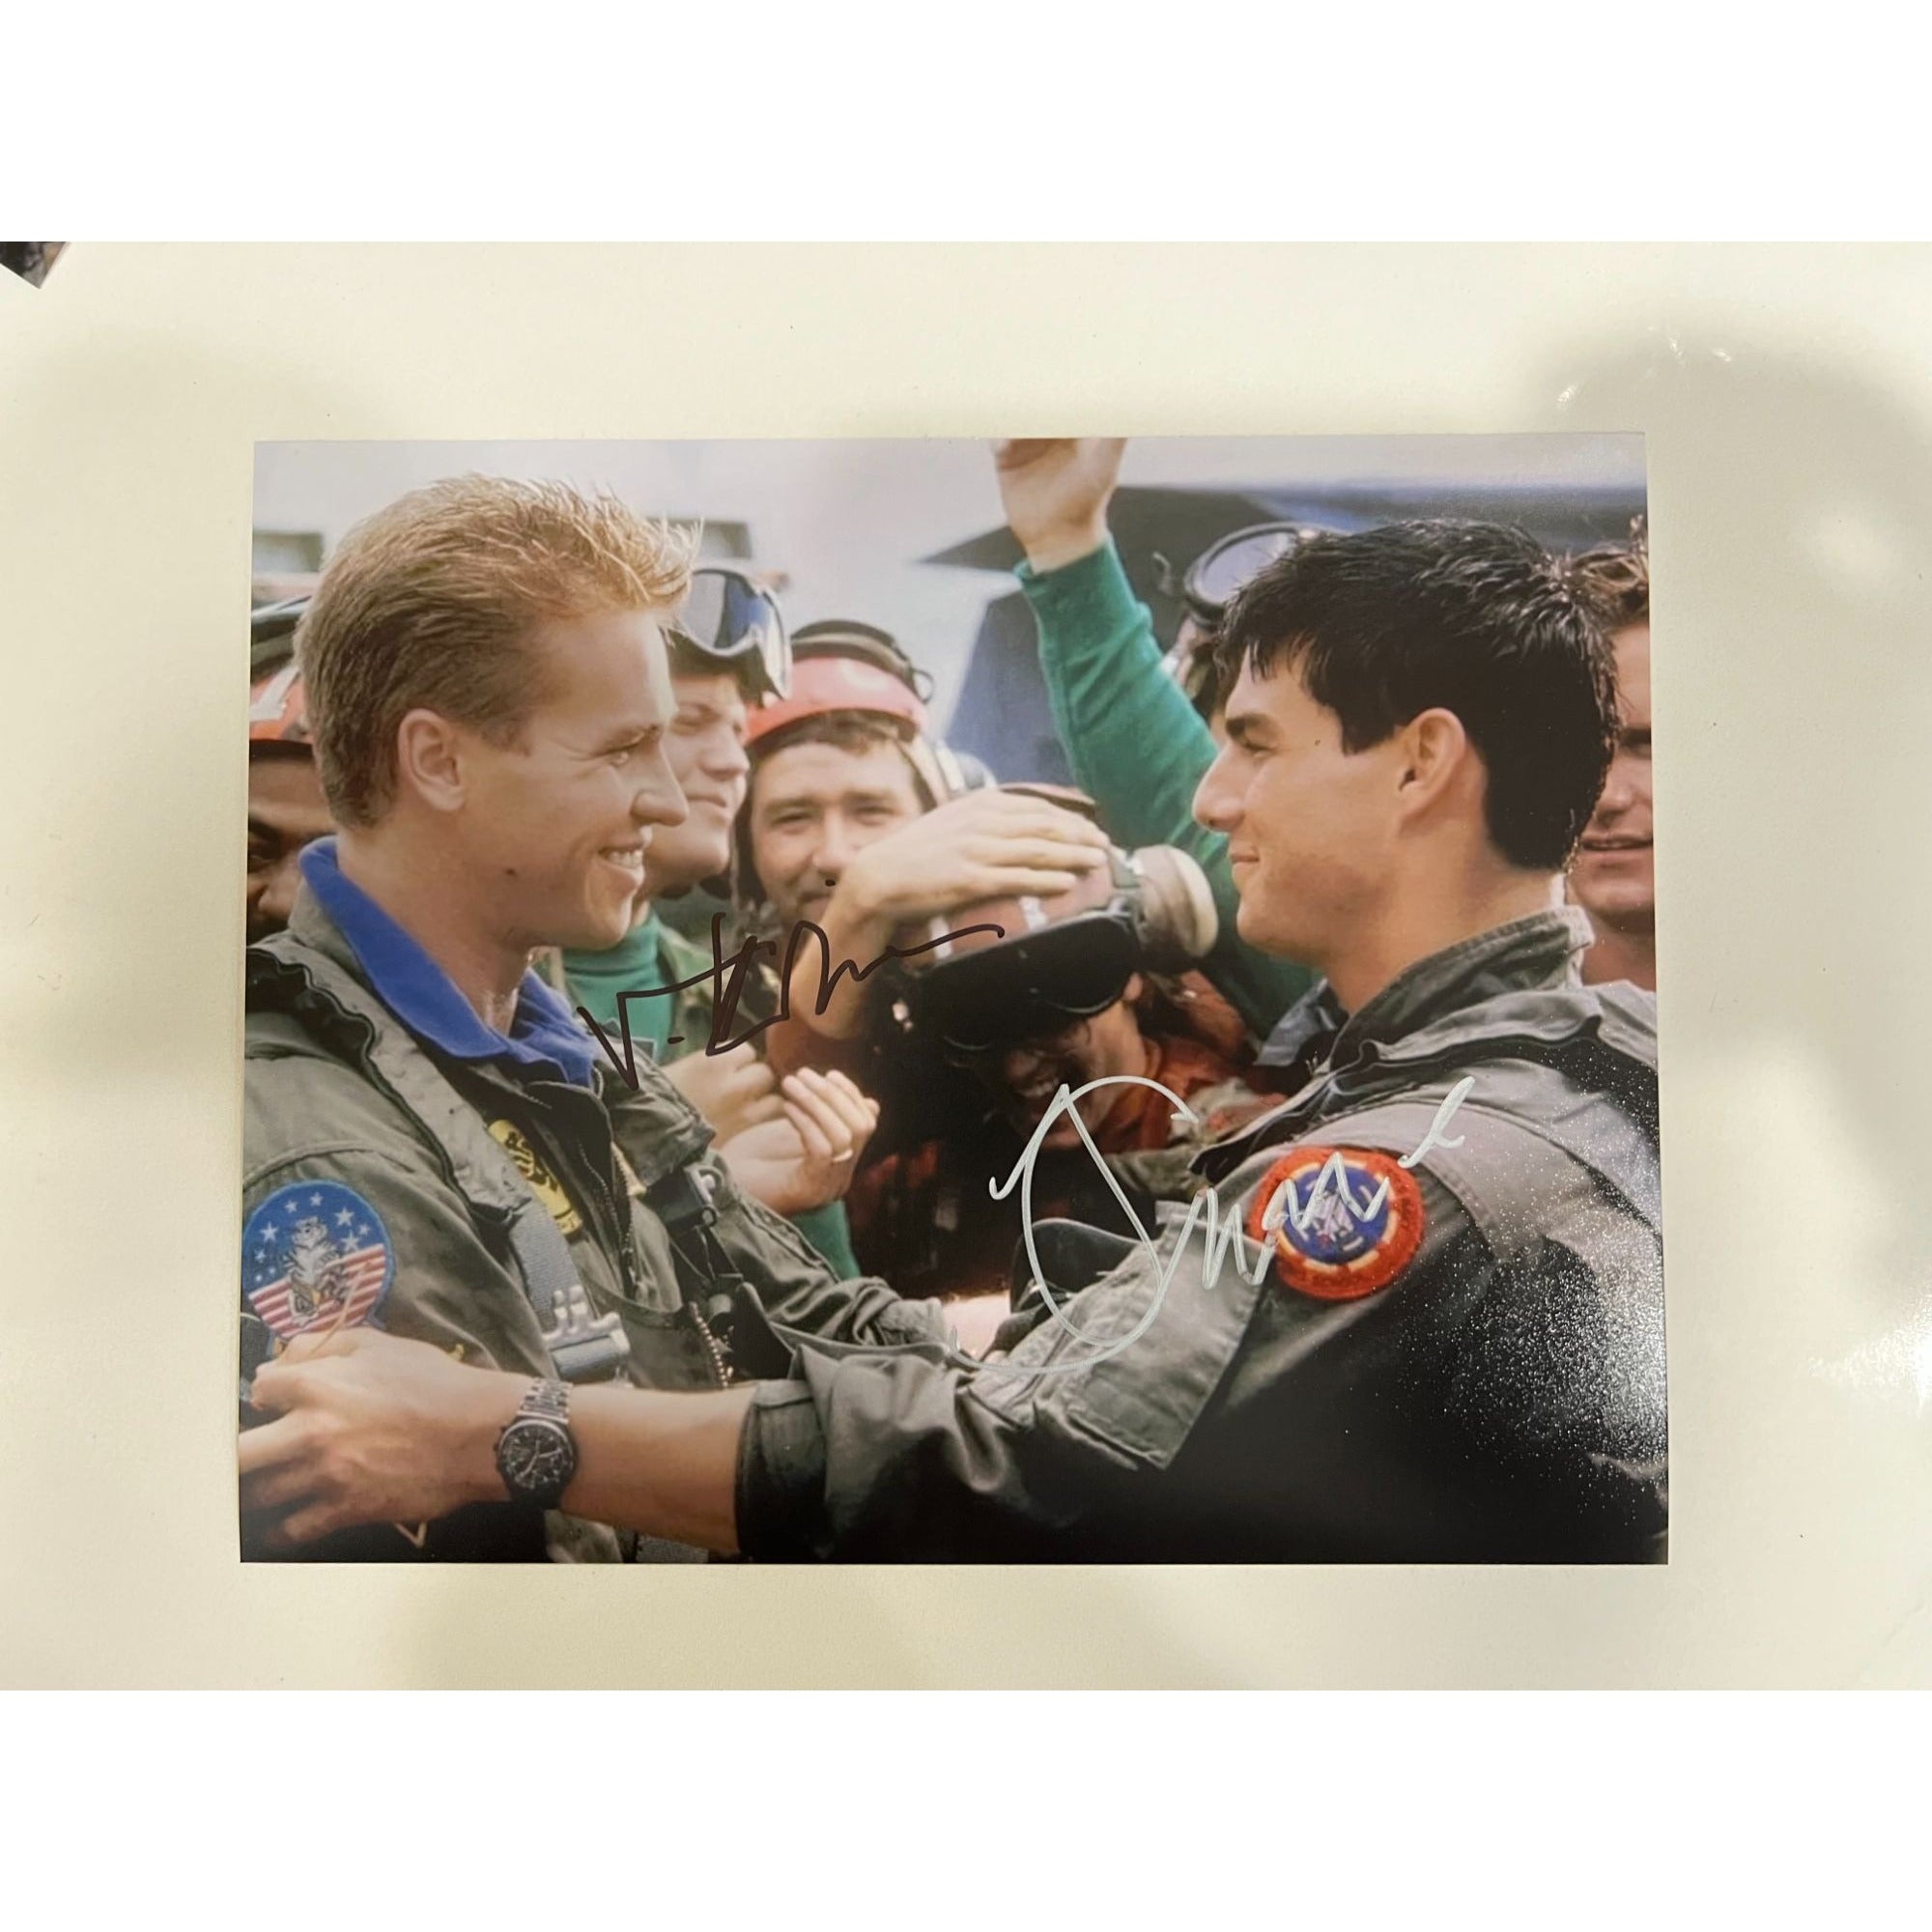 Top Gun Tom Cruise and Val Kilmer 8X10 signed with proof